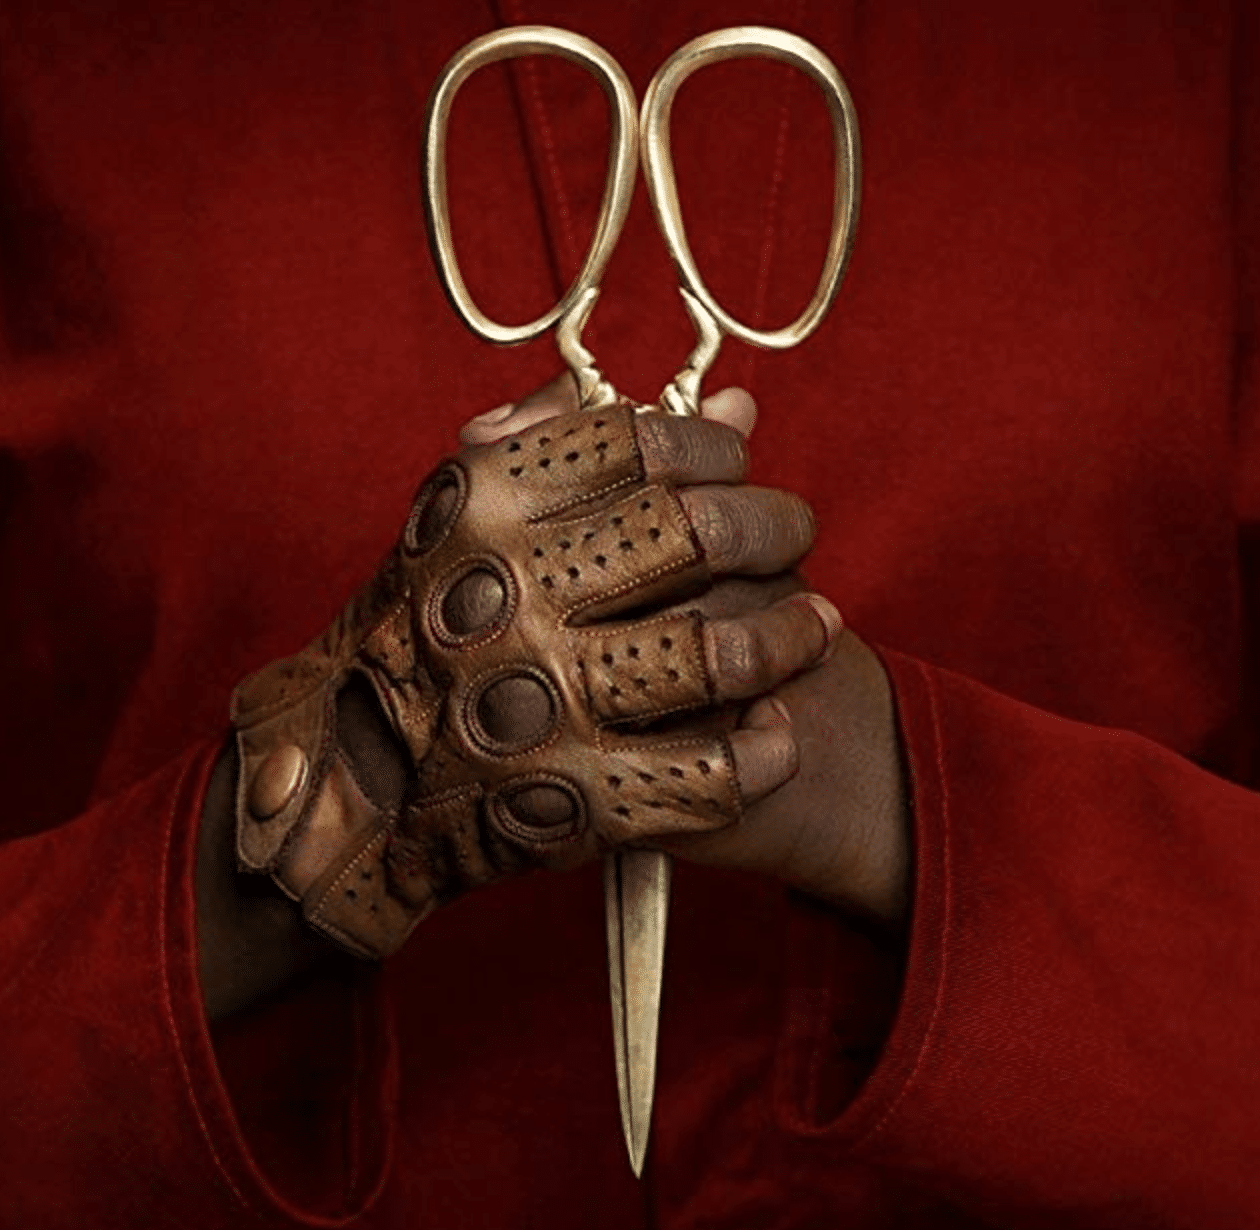 New Details And Photos Emerge For Jordan Peele's Upcoming 'Us'